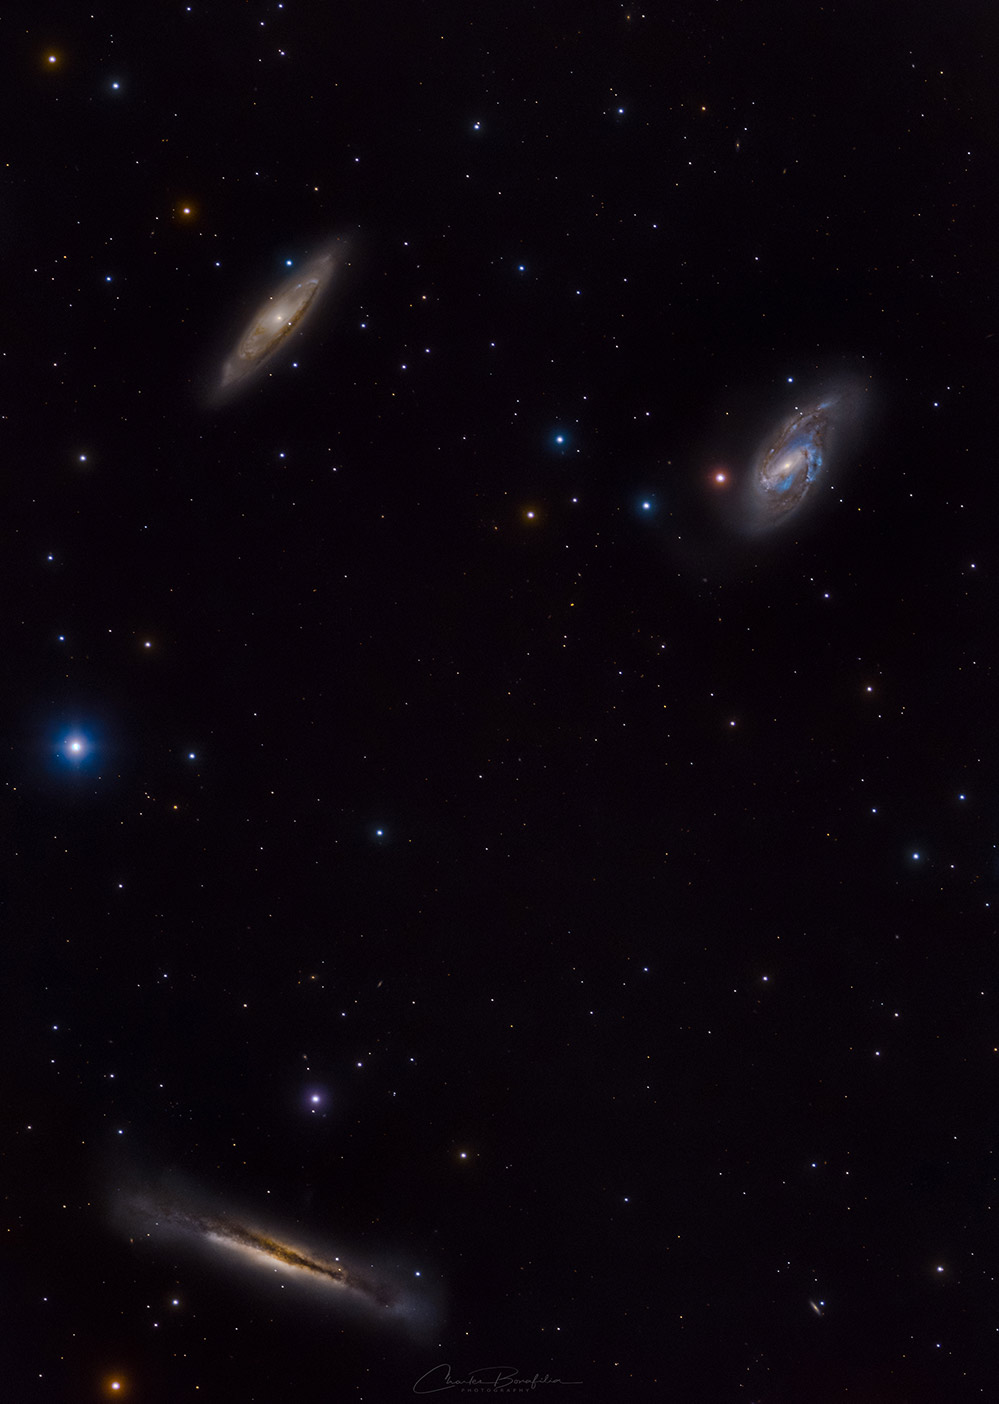 The Leo Triplet (also known as the M66 Group)